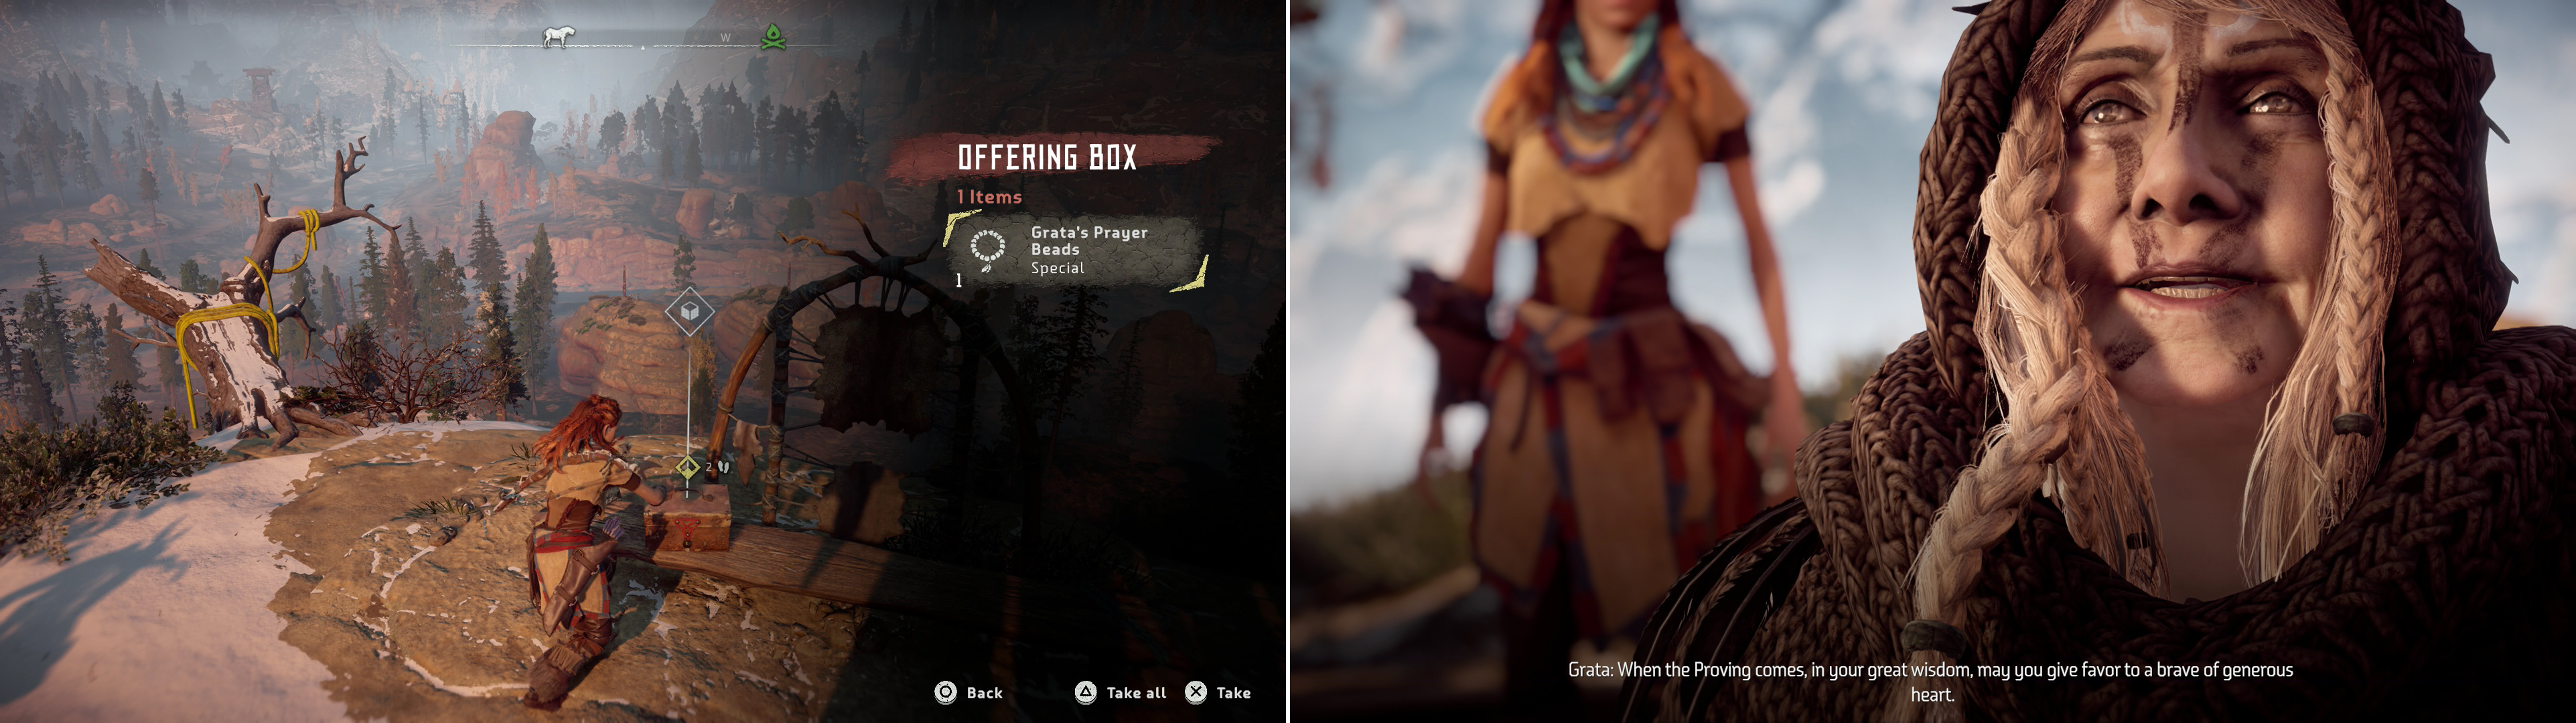 Find Grata’s Prayer Beads in an Offering Box on the overlook (left), then return to Odd Grata to recieve her gratitude… kind of (right).